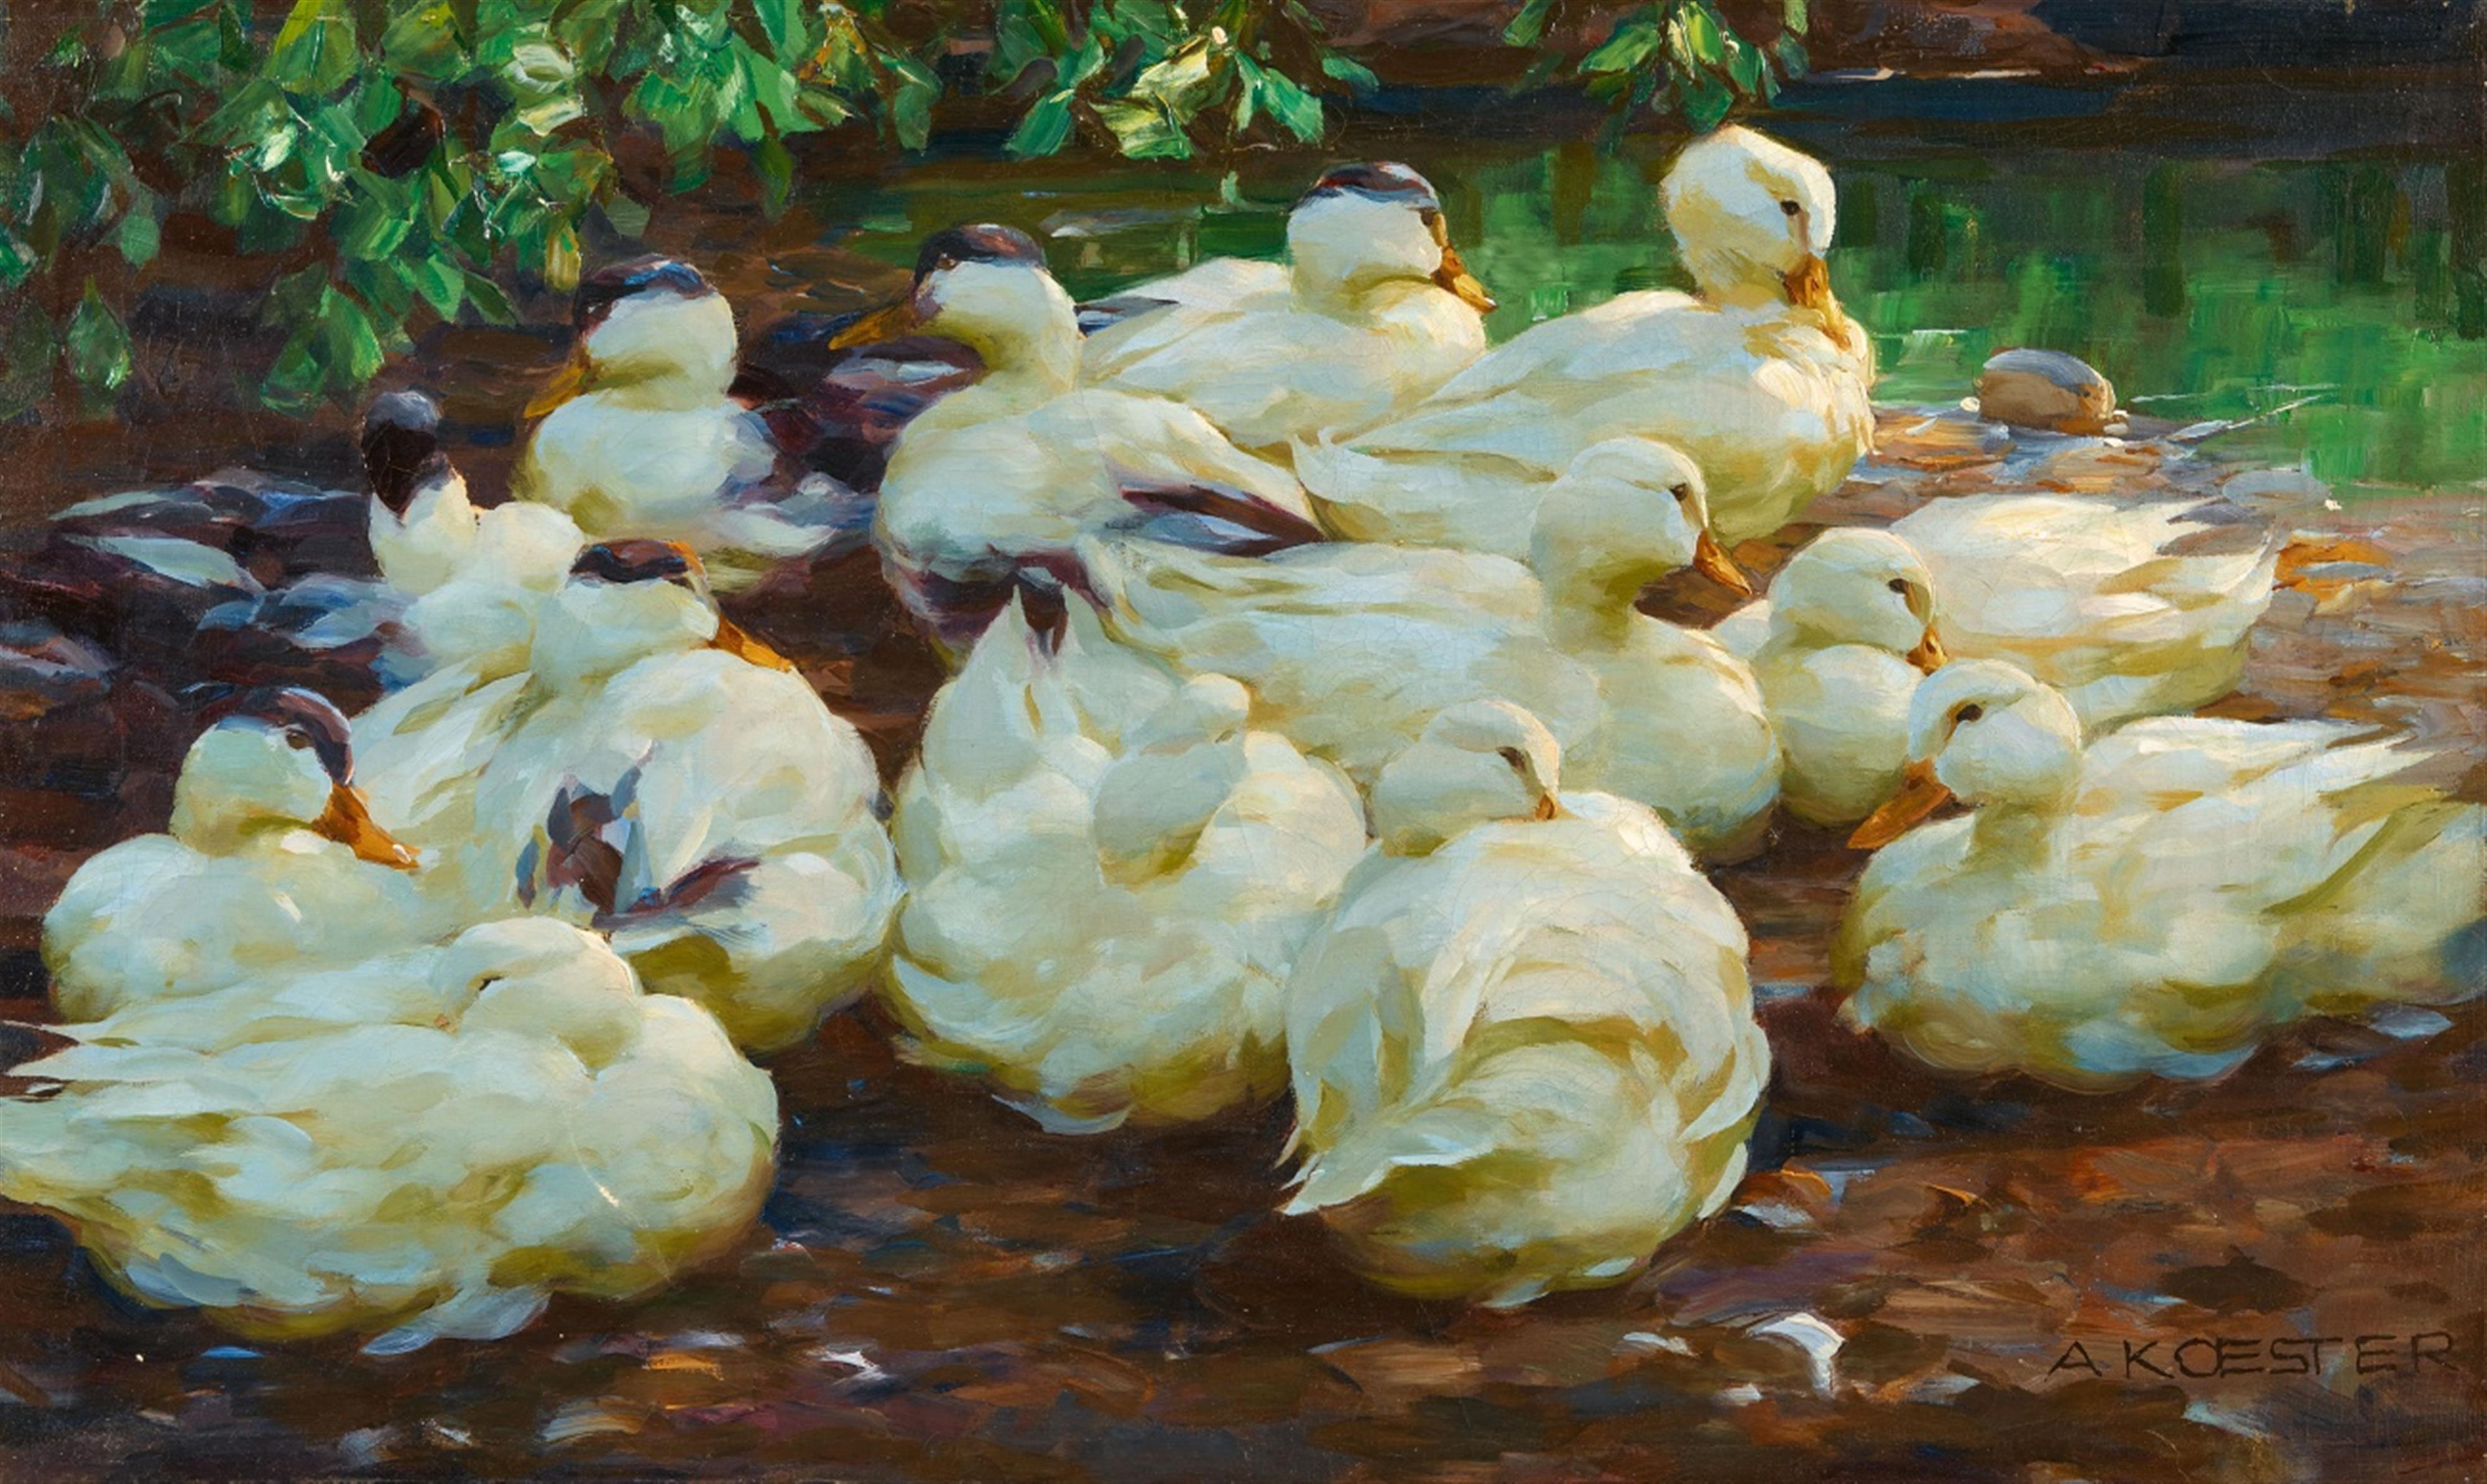 Alexander Koester - White Ducks by a Pond - image-1